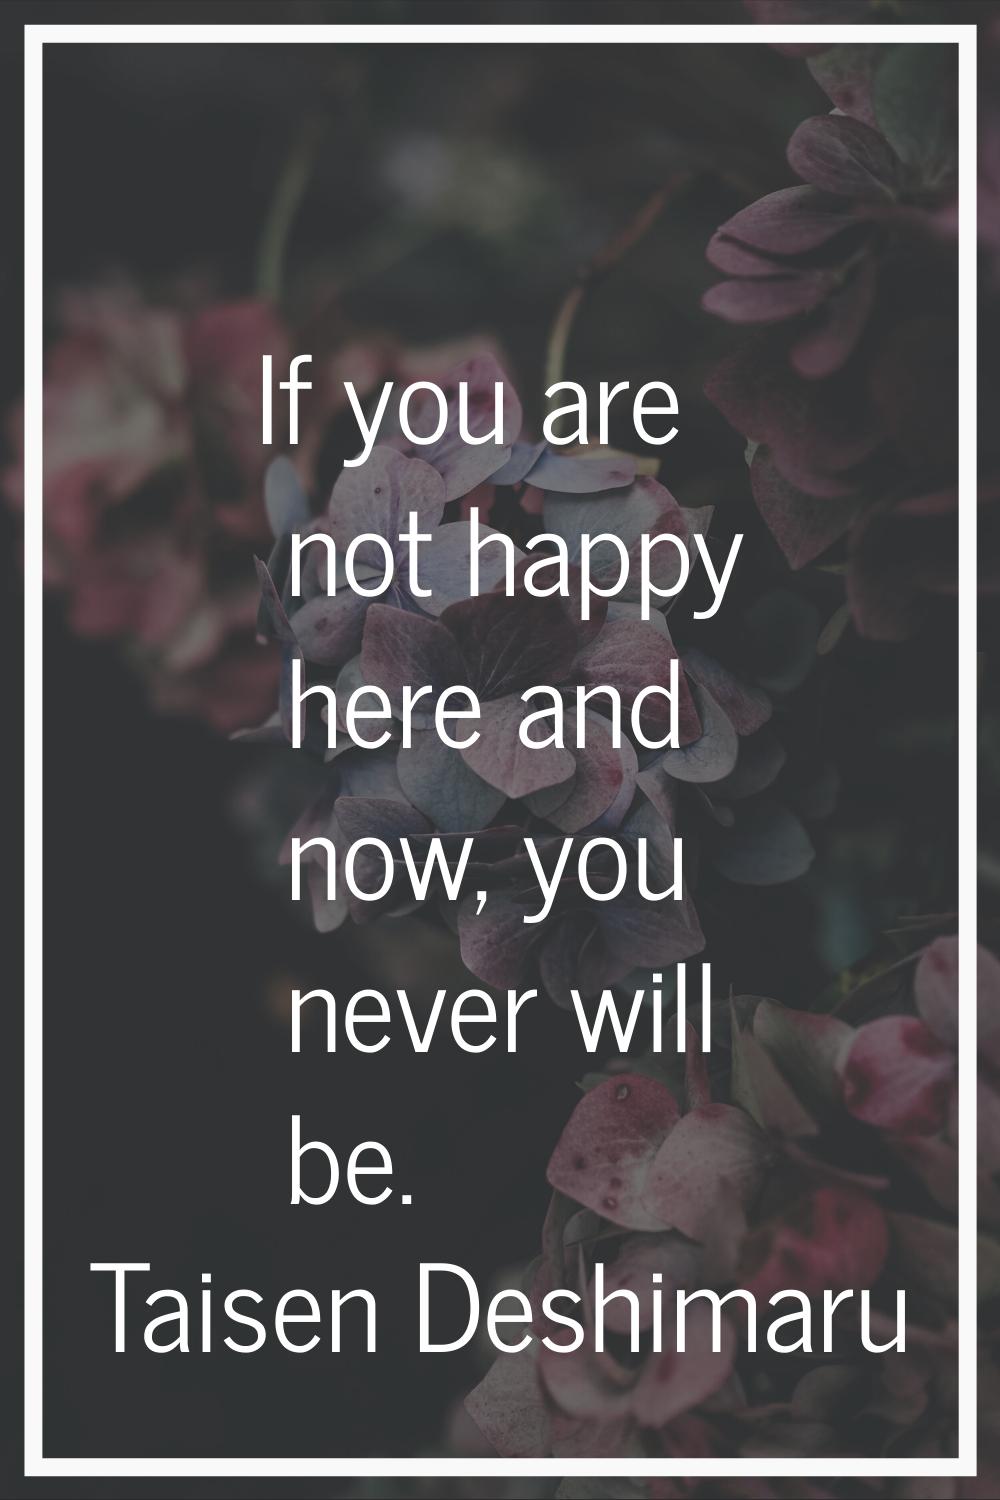 If you are not happy here and now, you never will be.